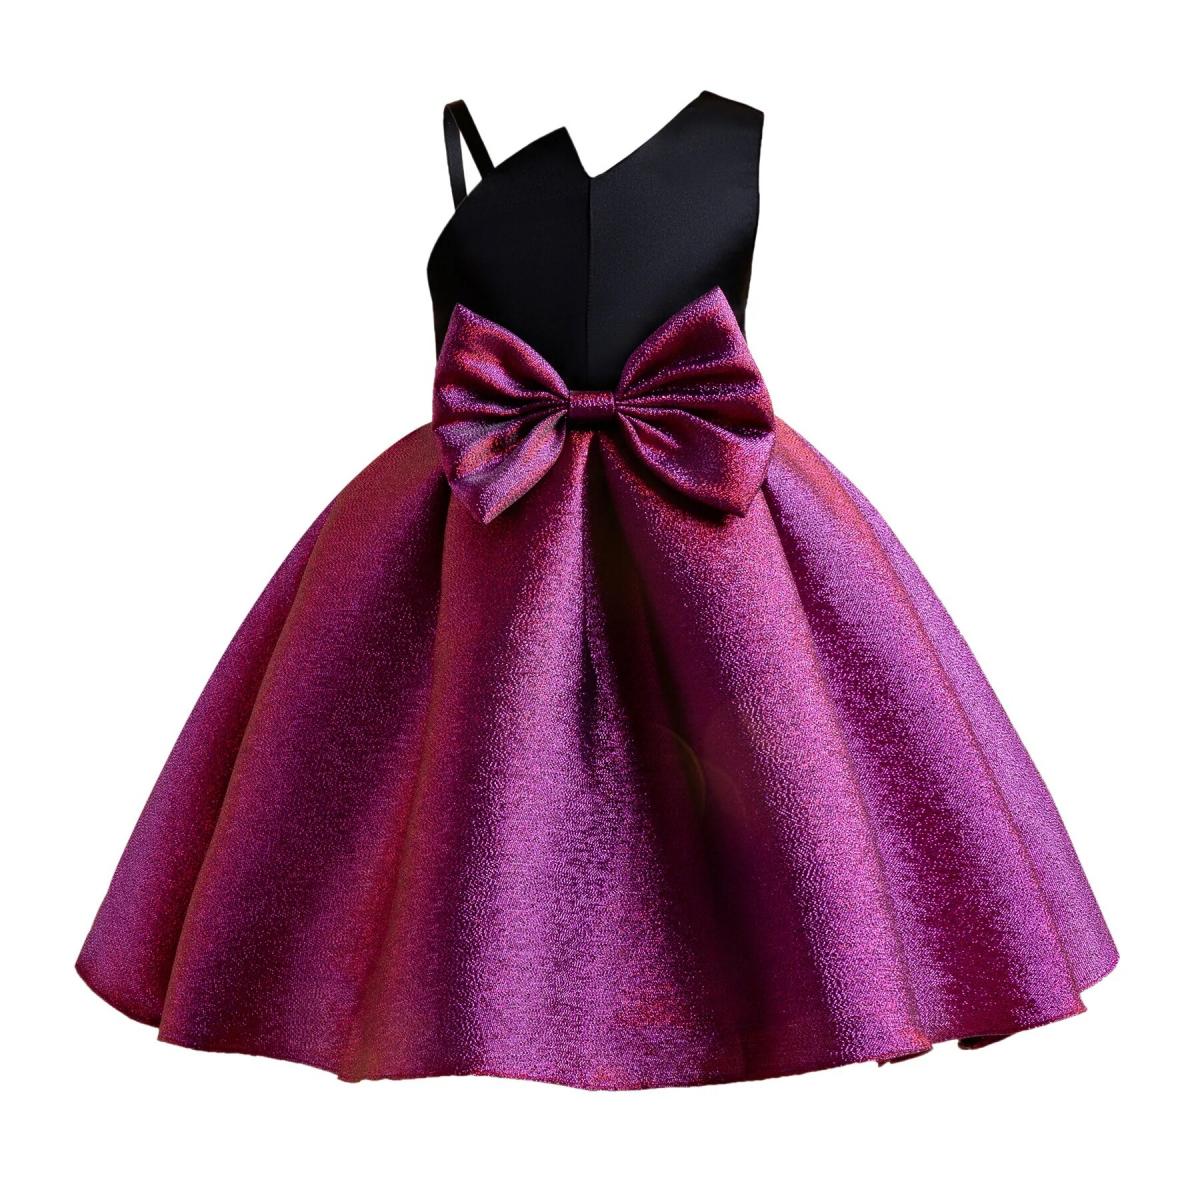 Children's Dress New Bright Face Plush One Shoulder Princess Gift Suitable For Girls Aged 3 10 Christmas Performance Clo